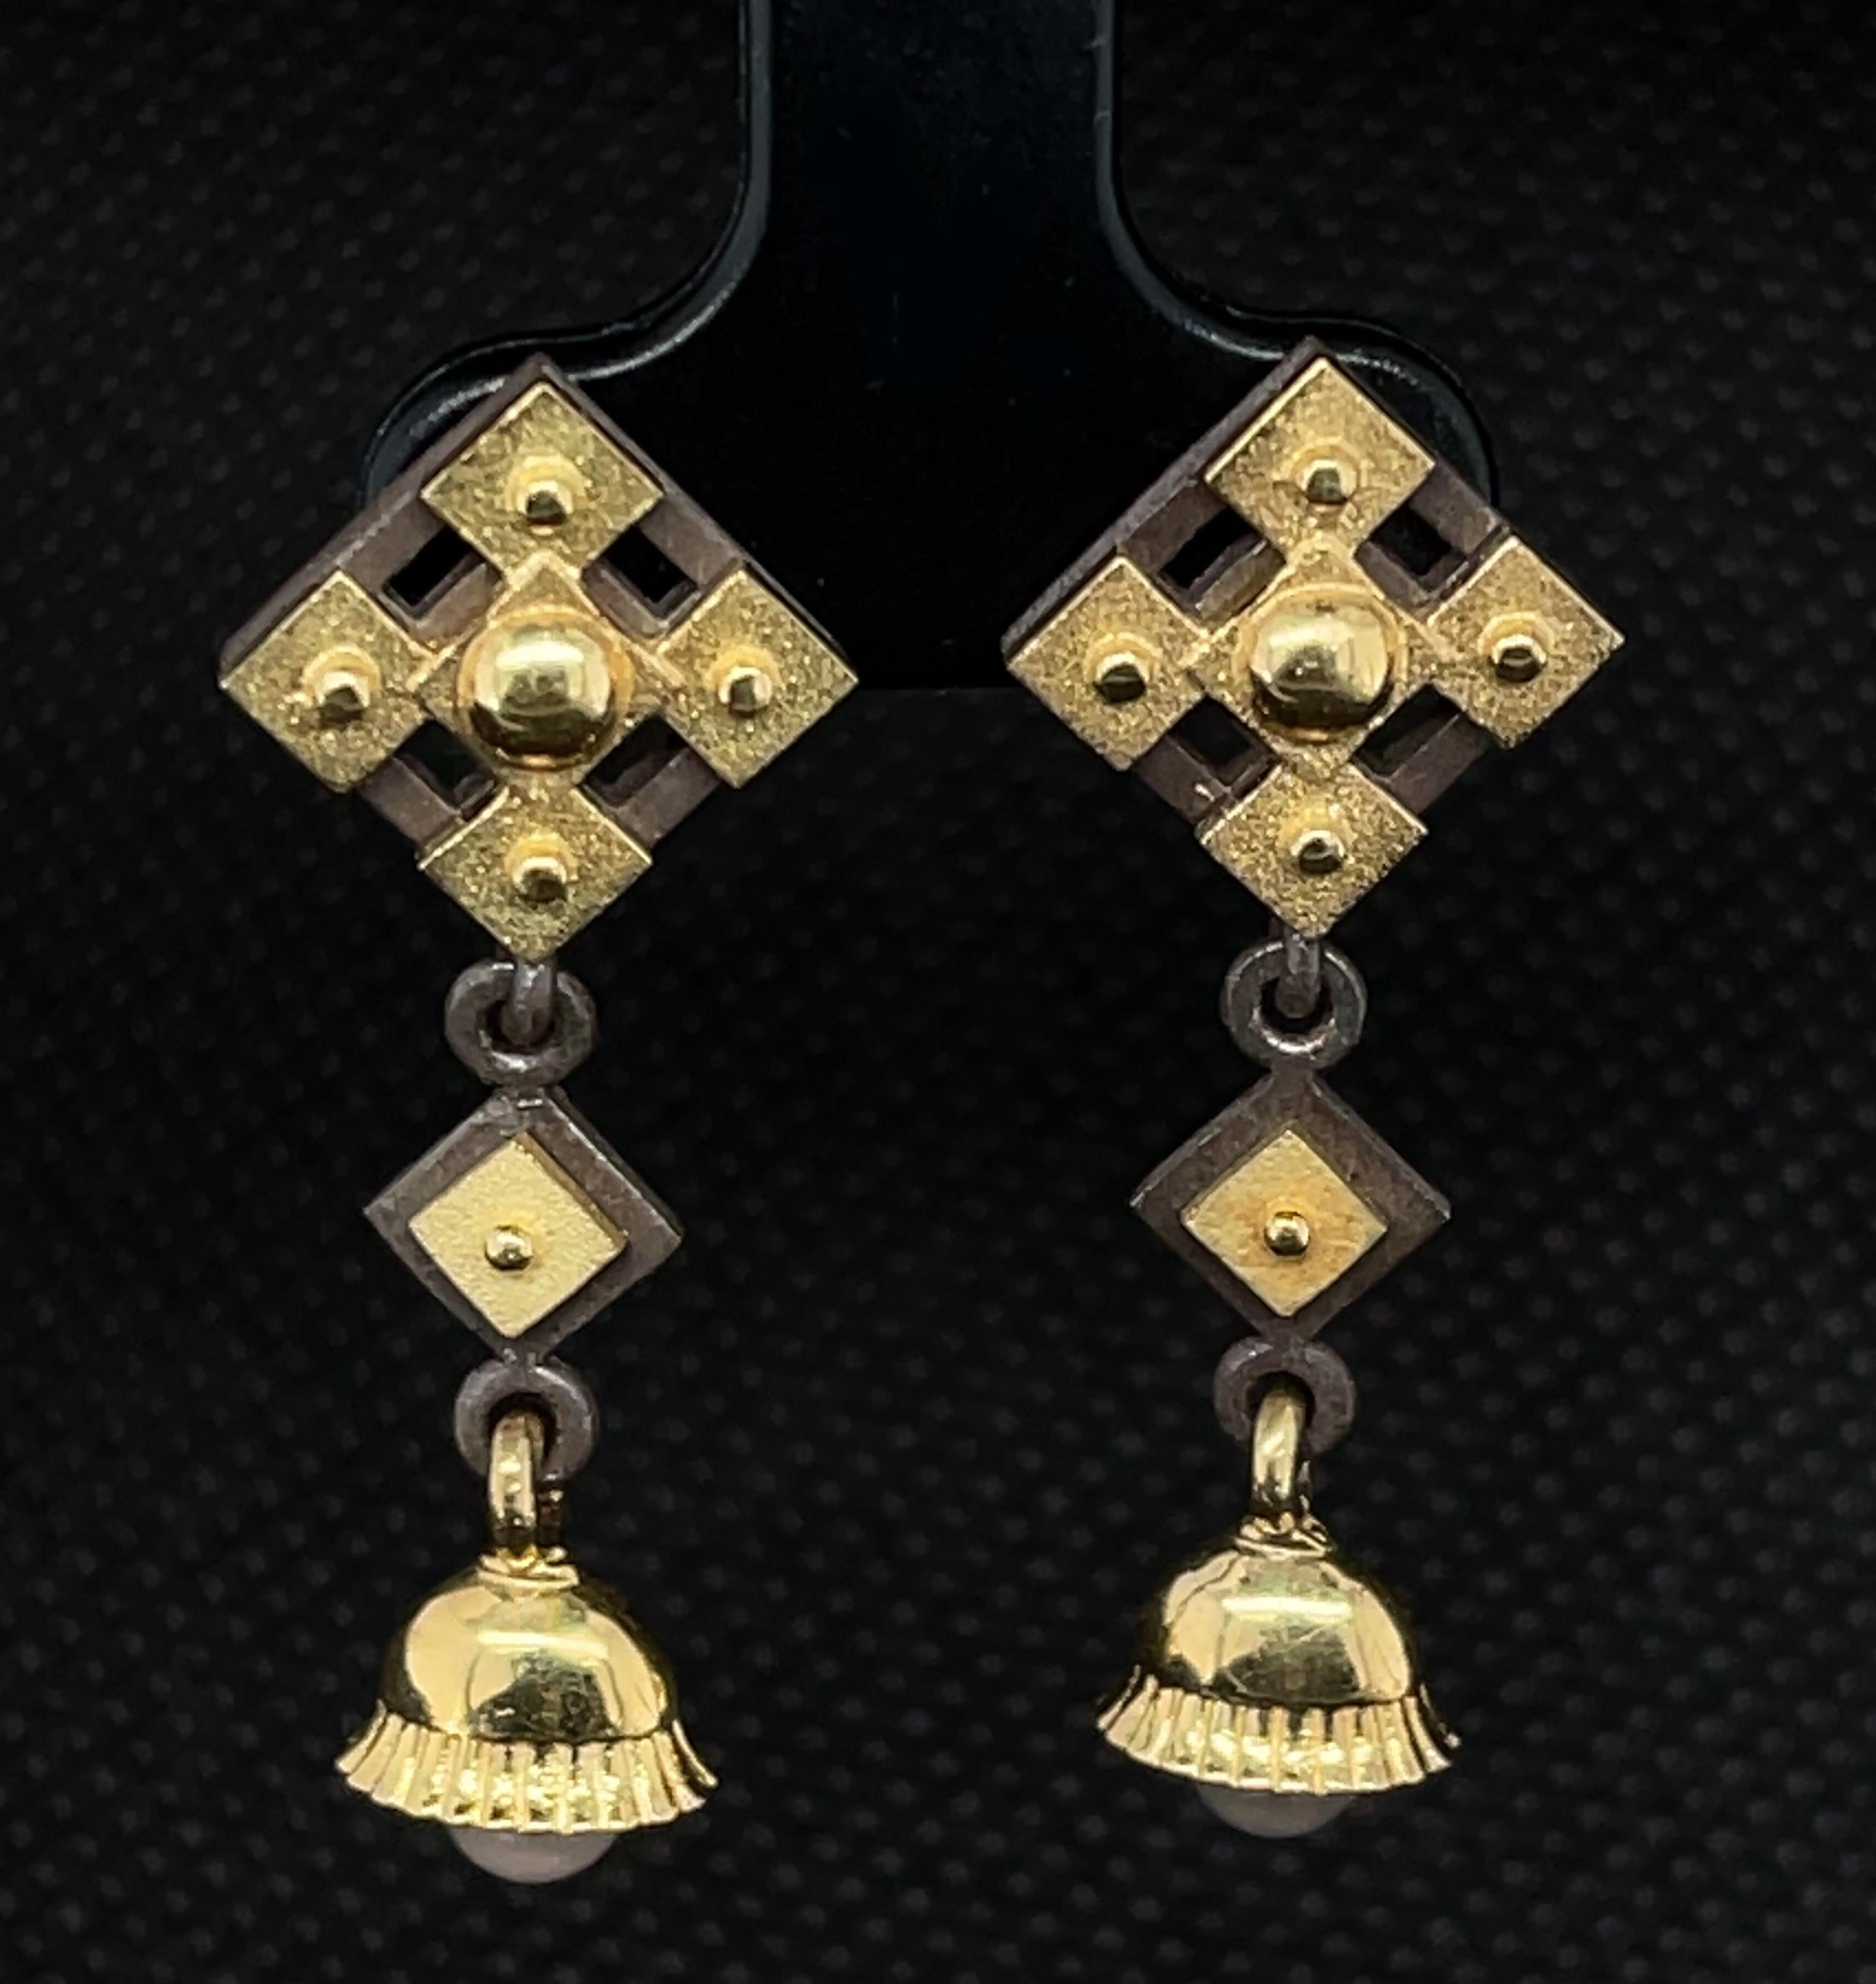 These beautiful earrings are a part of our 